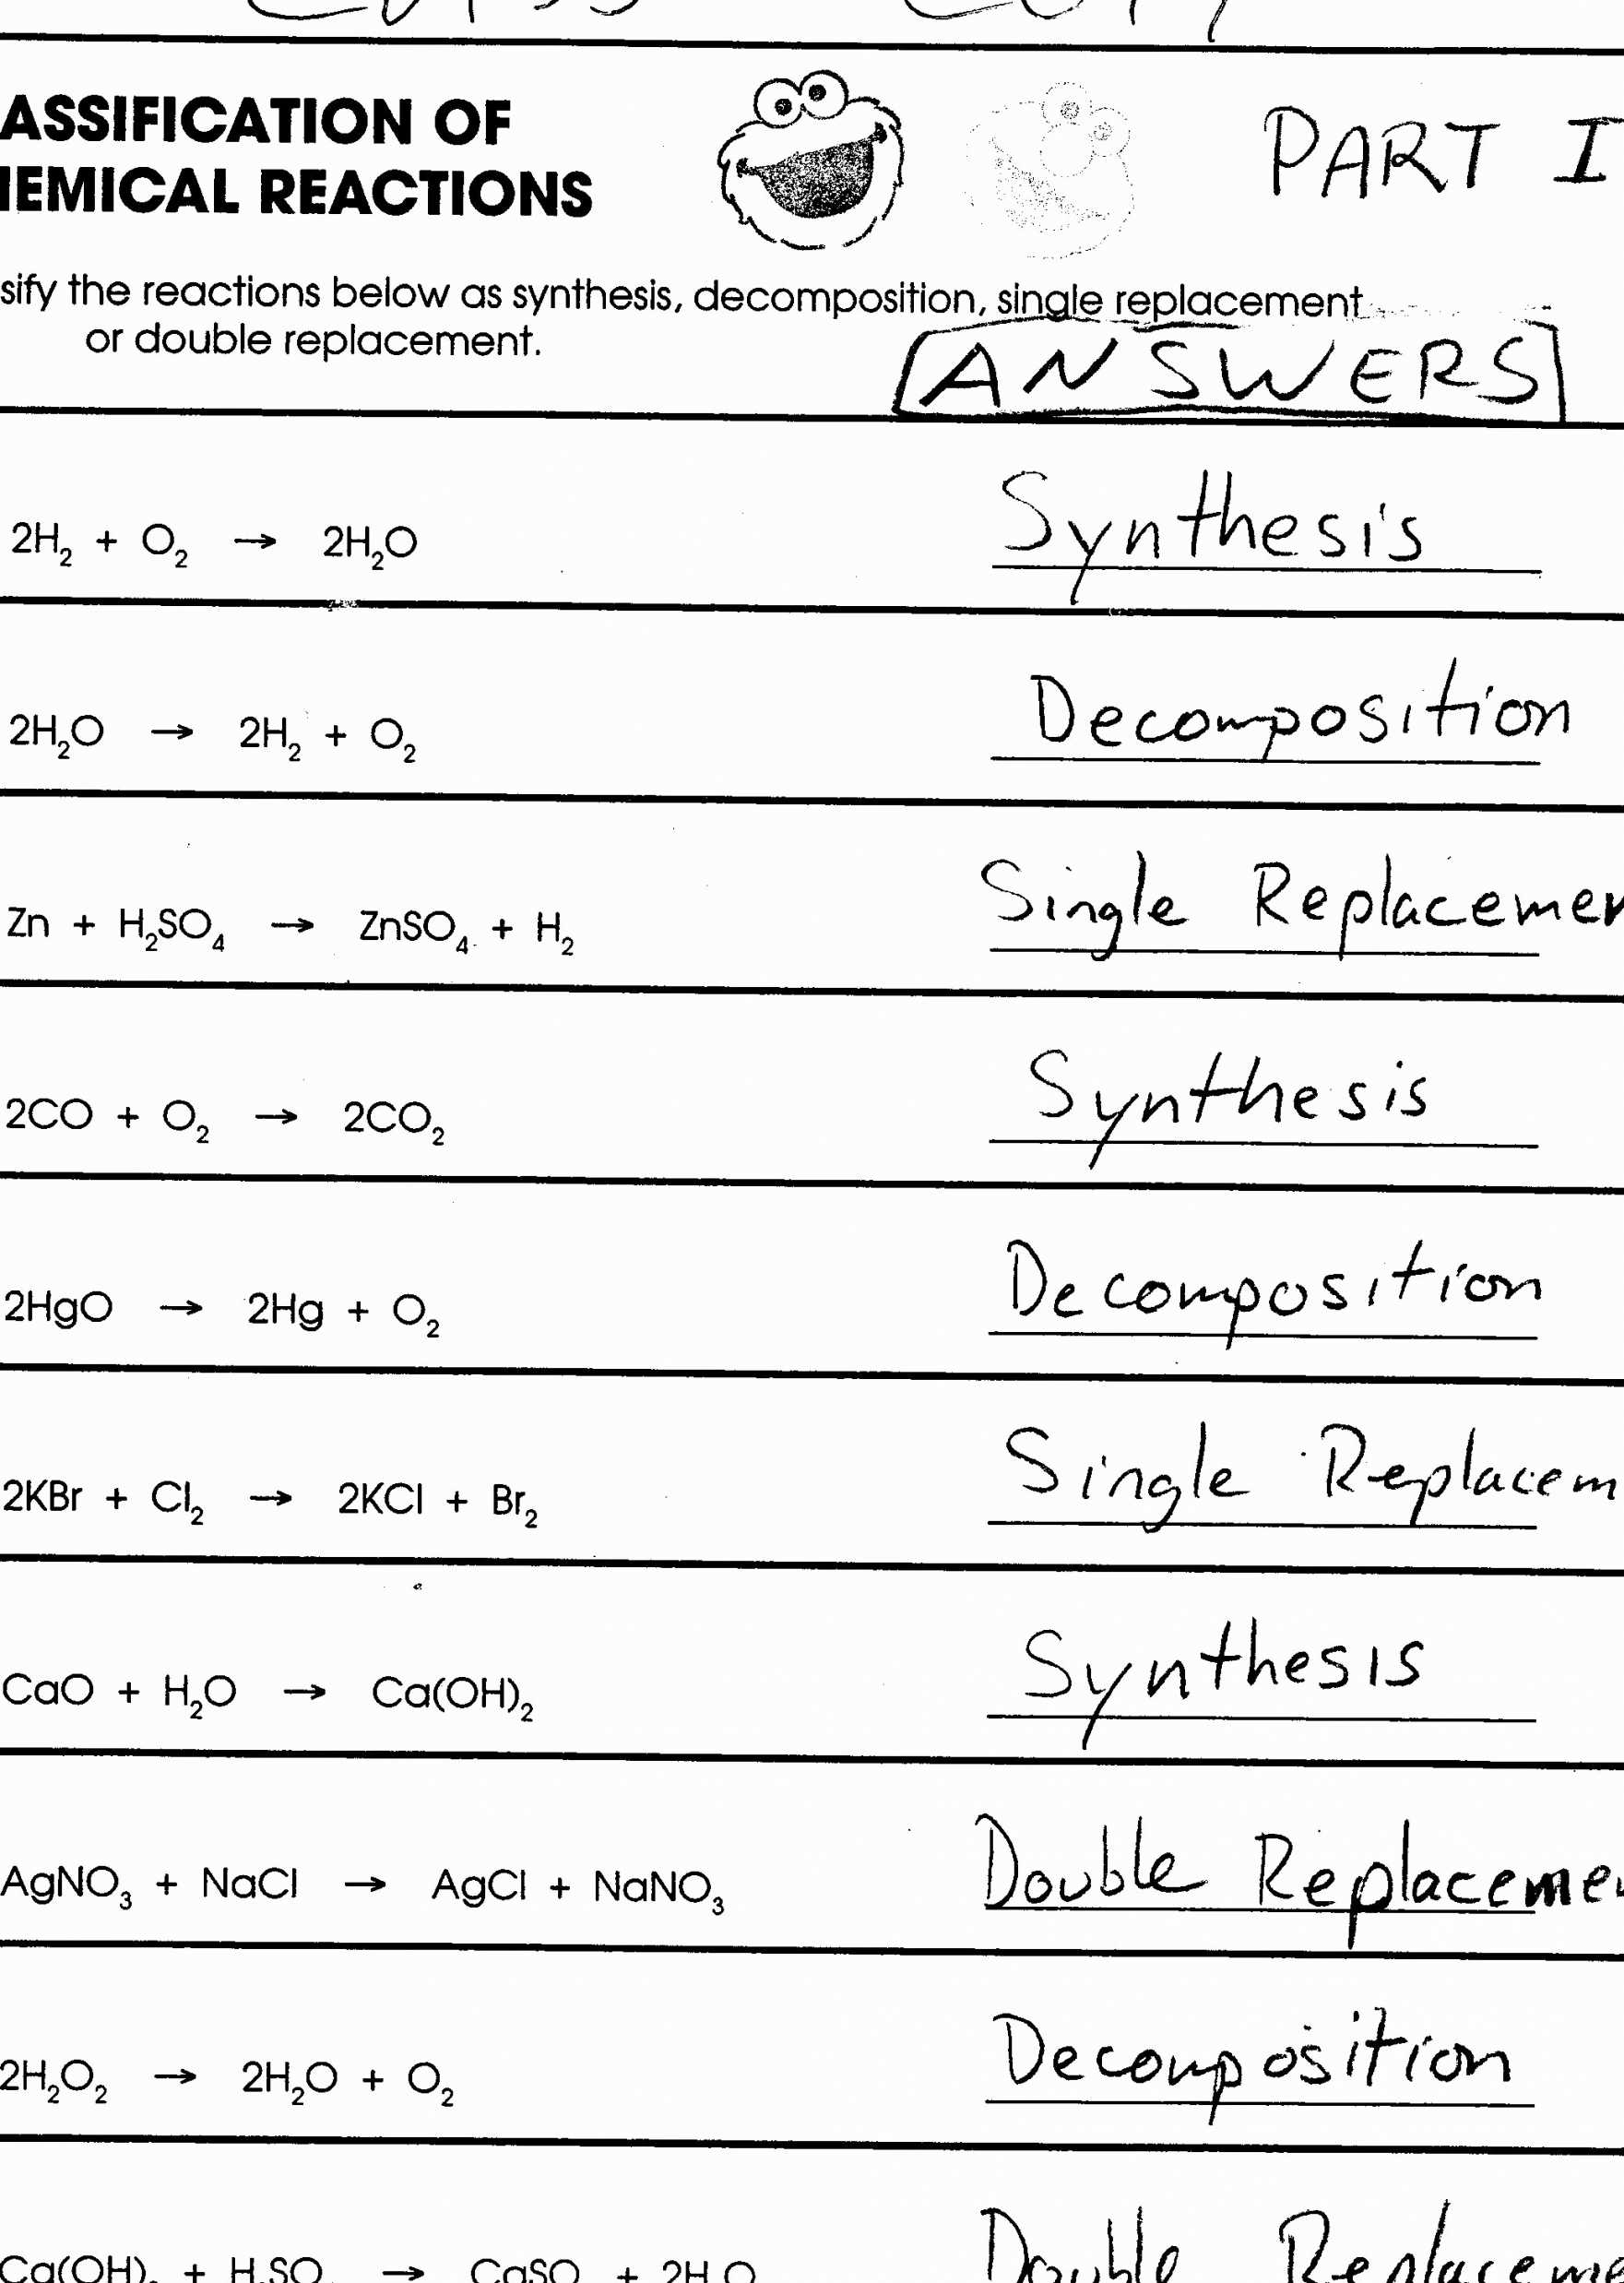 Classifying Chemical Reactions Worksheet Answers Also Worksheet Types Reactions Worksheet Answers Inspiration